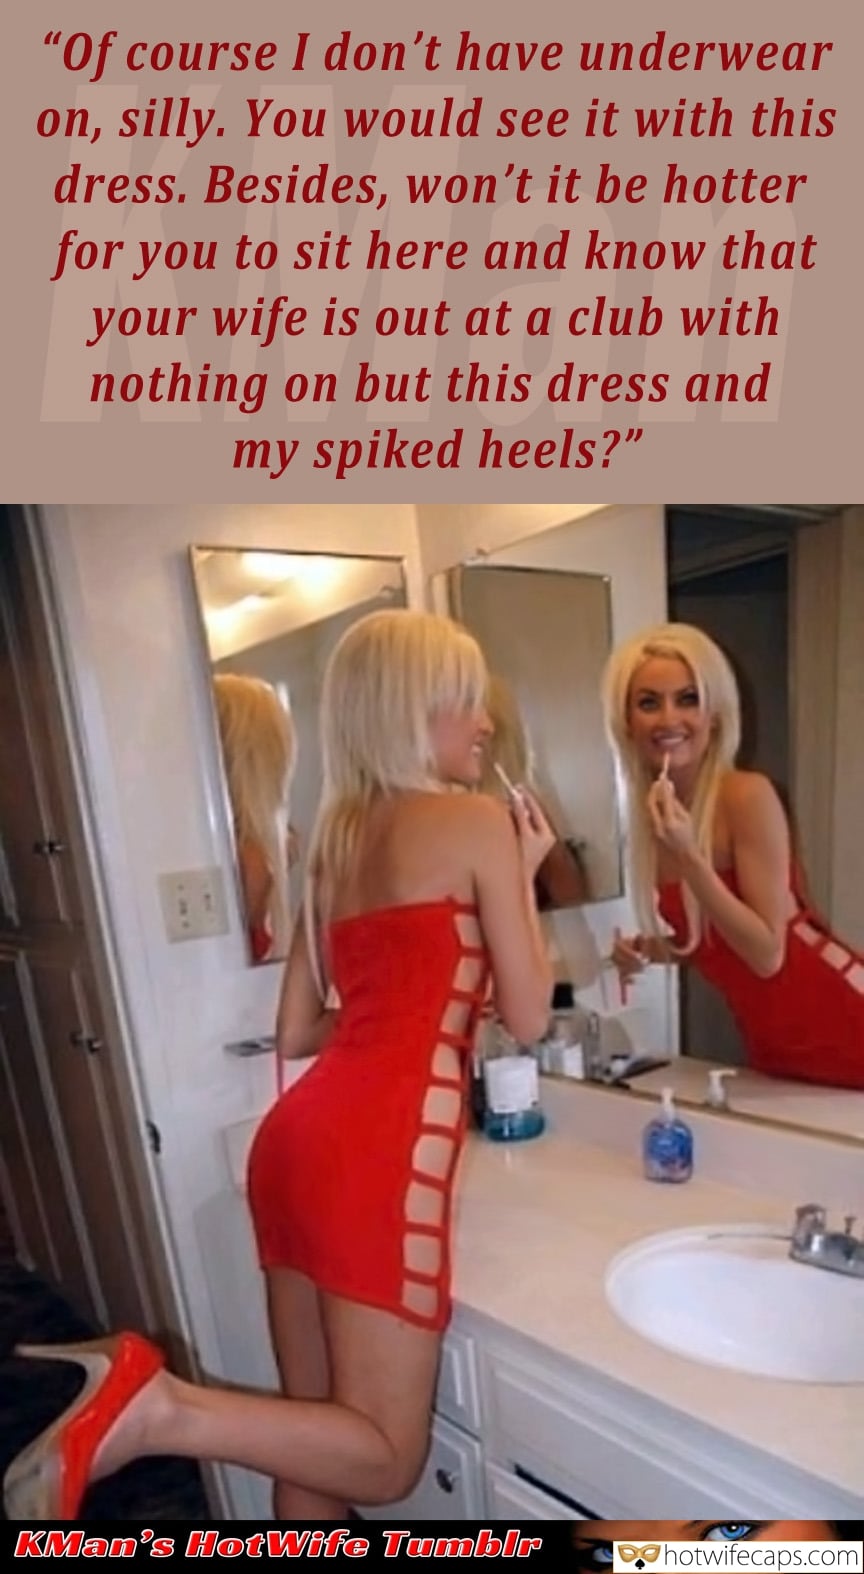 Wife Sharing Sexy Memes Cheating Bully Bull hotwife caption: “Of course I don’t have underwear on, silly. You would see it with this dress. Besides, won’t it be hotter for you to sit here and know that your wife is out at a club with nothing on but this...